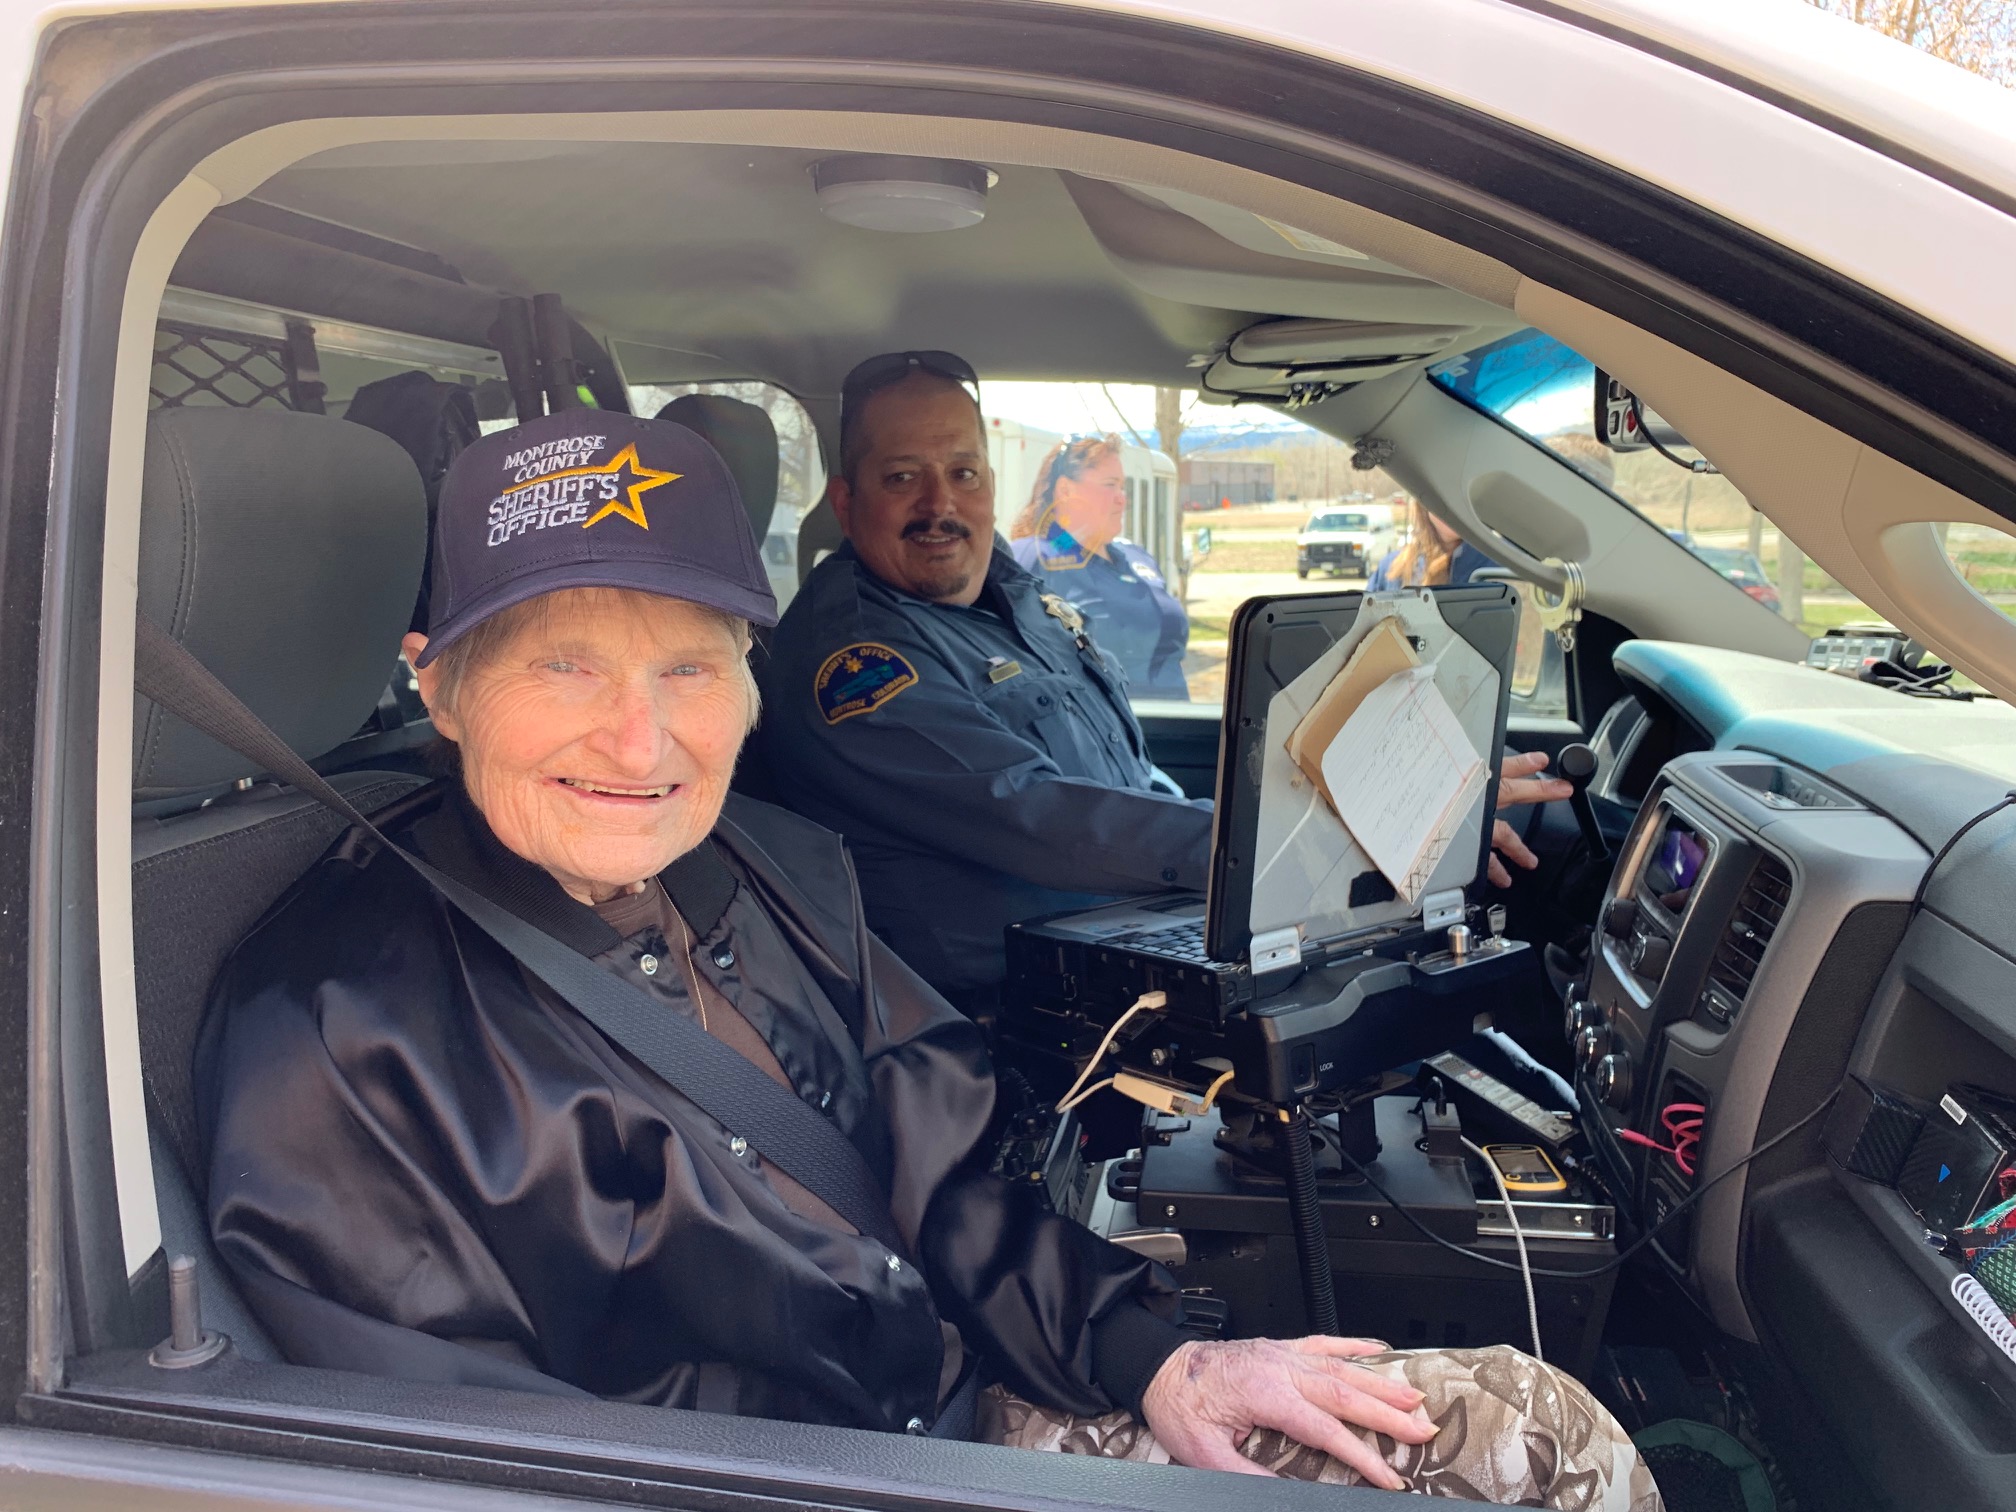 Montrose County Sheriff's Office Ride Along